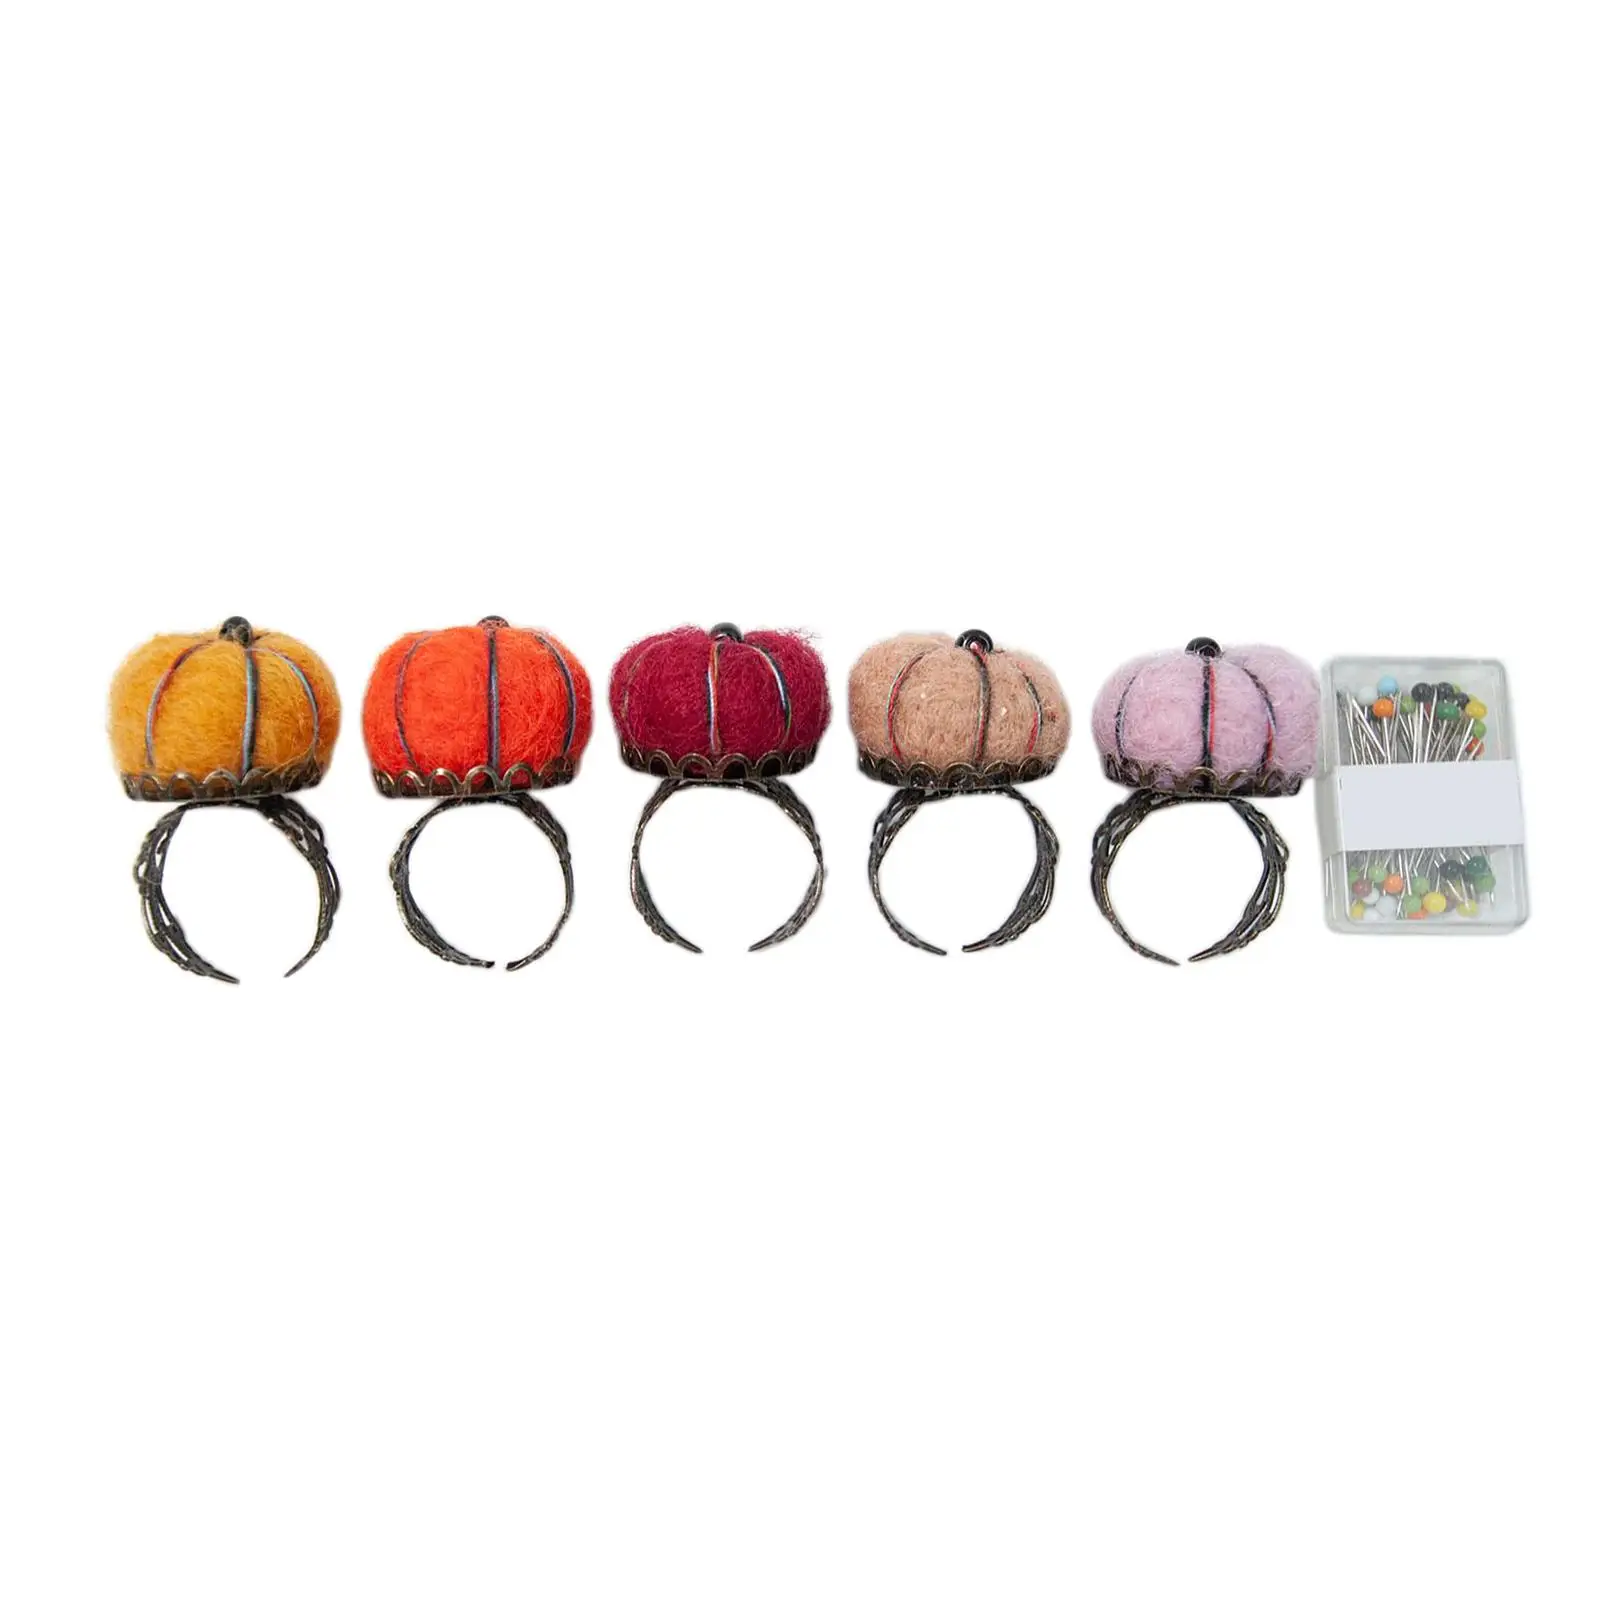 5Pcs Felt Pincushions DIY Crafts Needle Holder for Quilting Sewing Accessory